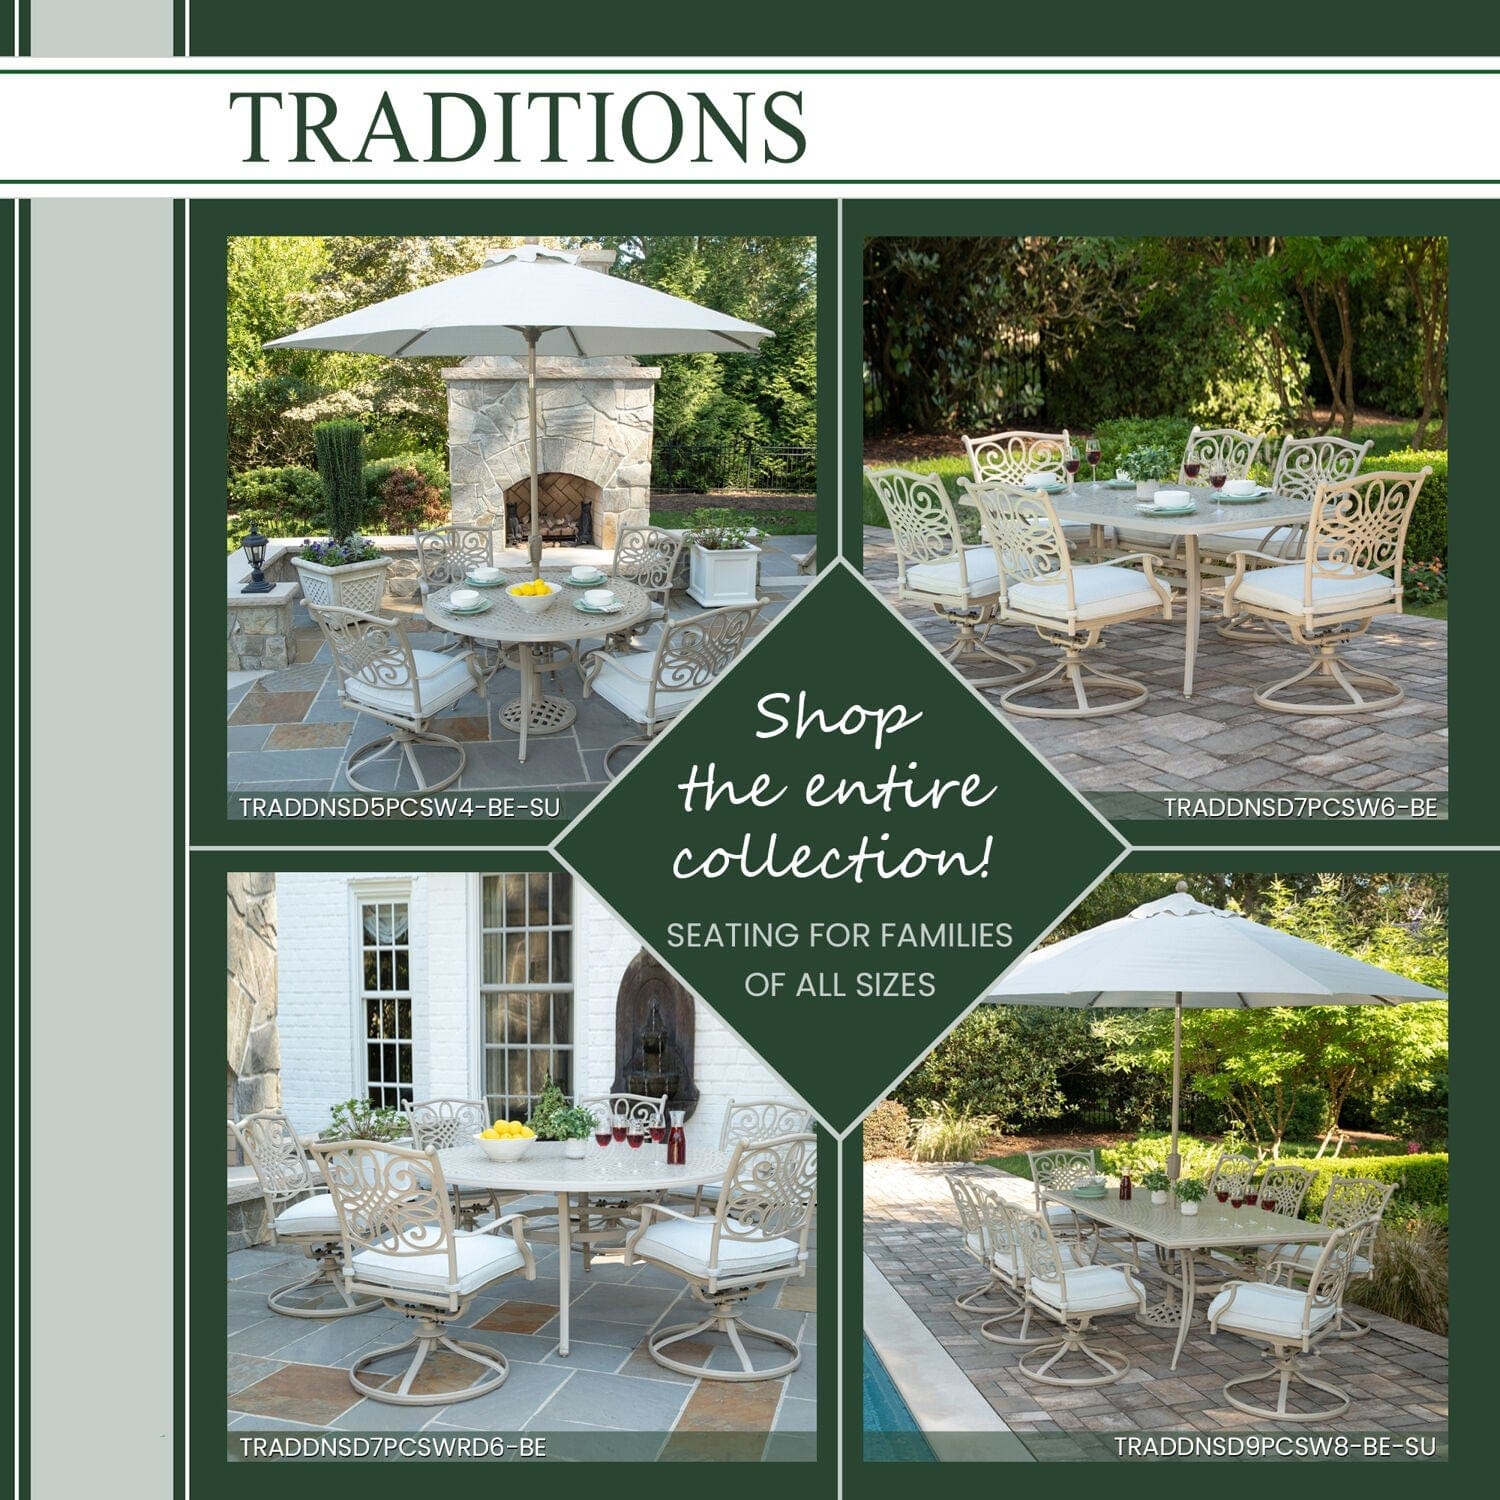 Hanover Outdoor Dining Set Hanover - Traditions 7-Piece Dining Set with 6 Swivel Rockers and 38-in. x 72-in. Cast-top Table, 9-Ft. Umbrella and Stand, Sand Finish - TRADDNSD7PCSW6-BE-SU